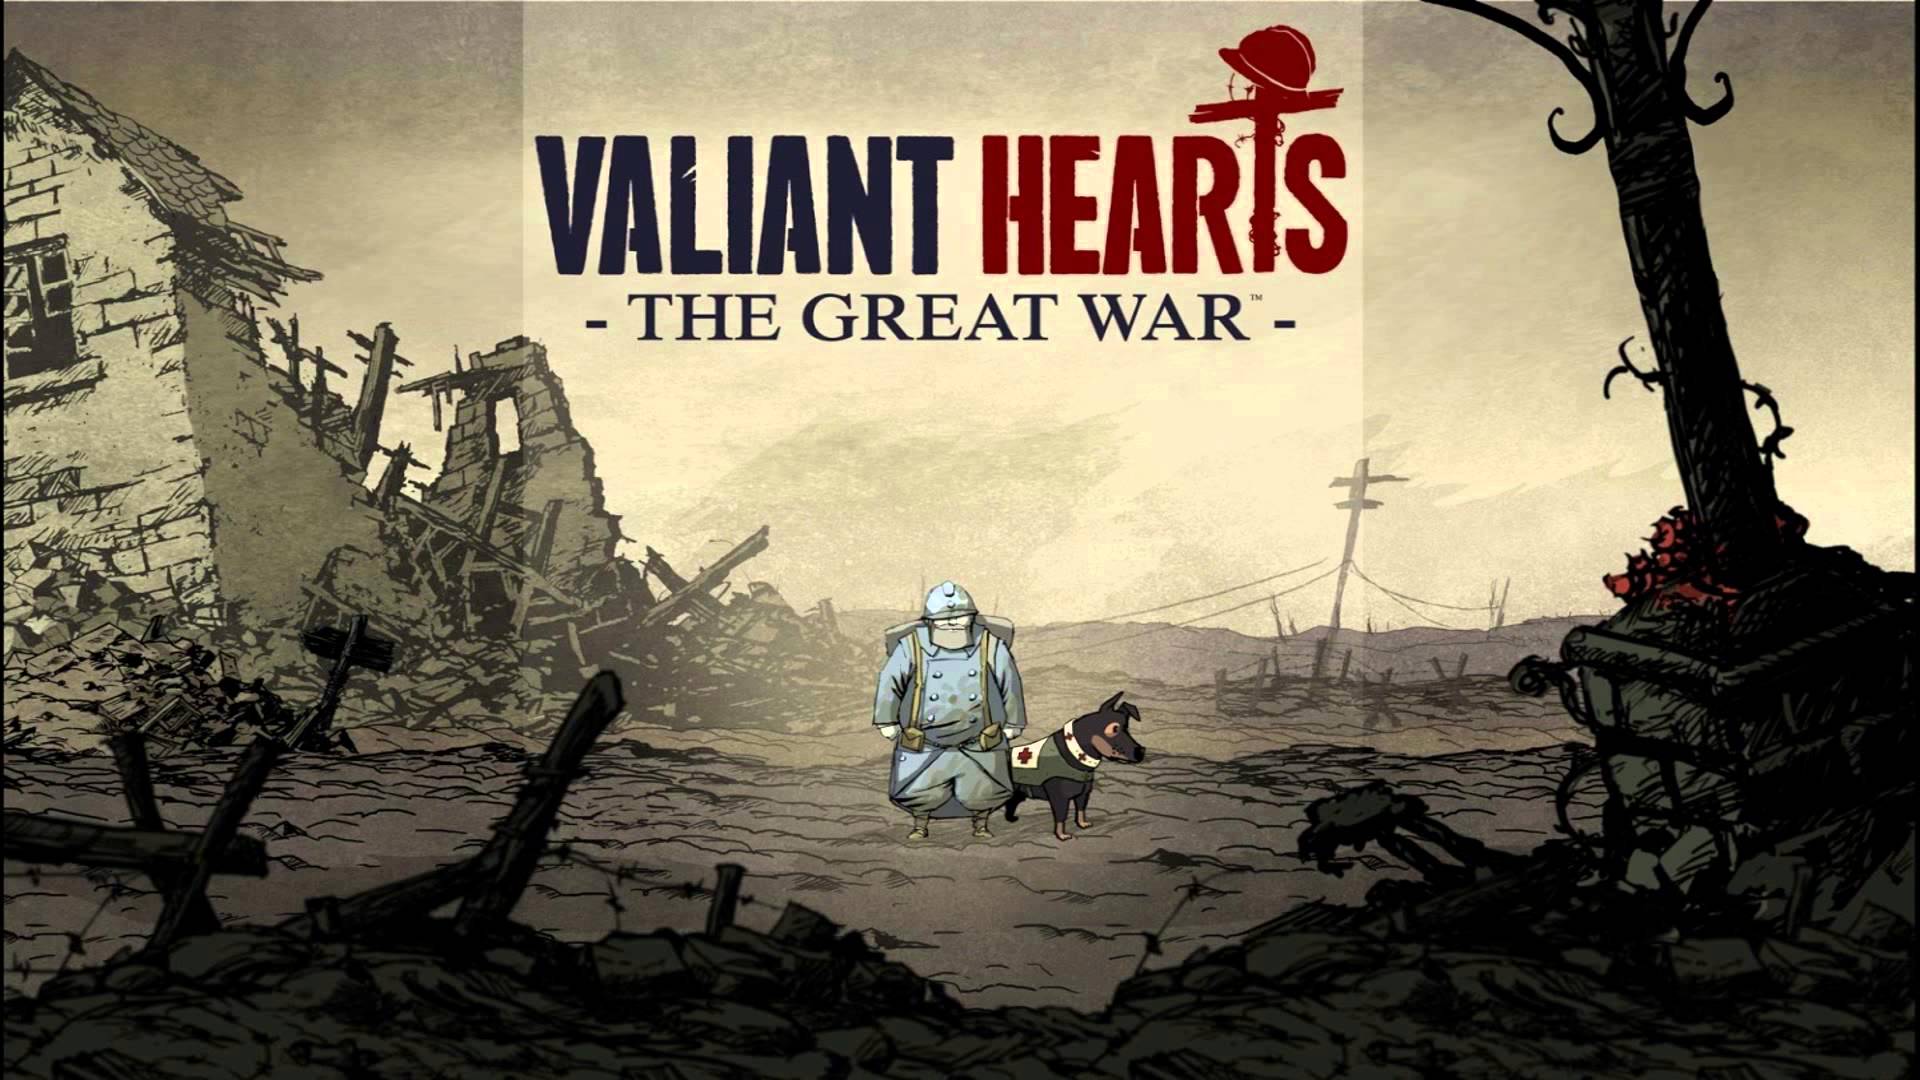 Valiant Hearts: The Great War Backgrounds, Compatible - PC, Mobile, Gadgets| 1920x1080 px